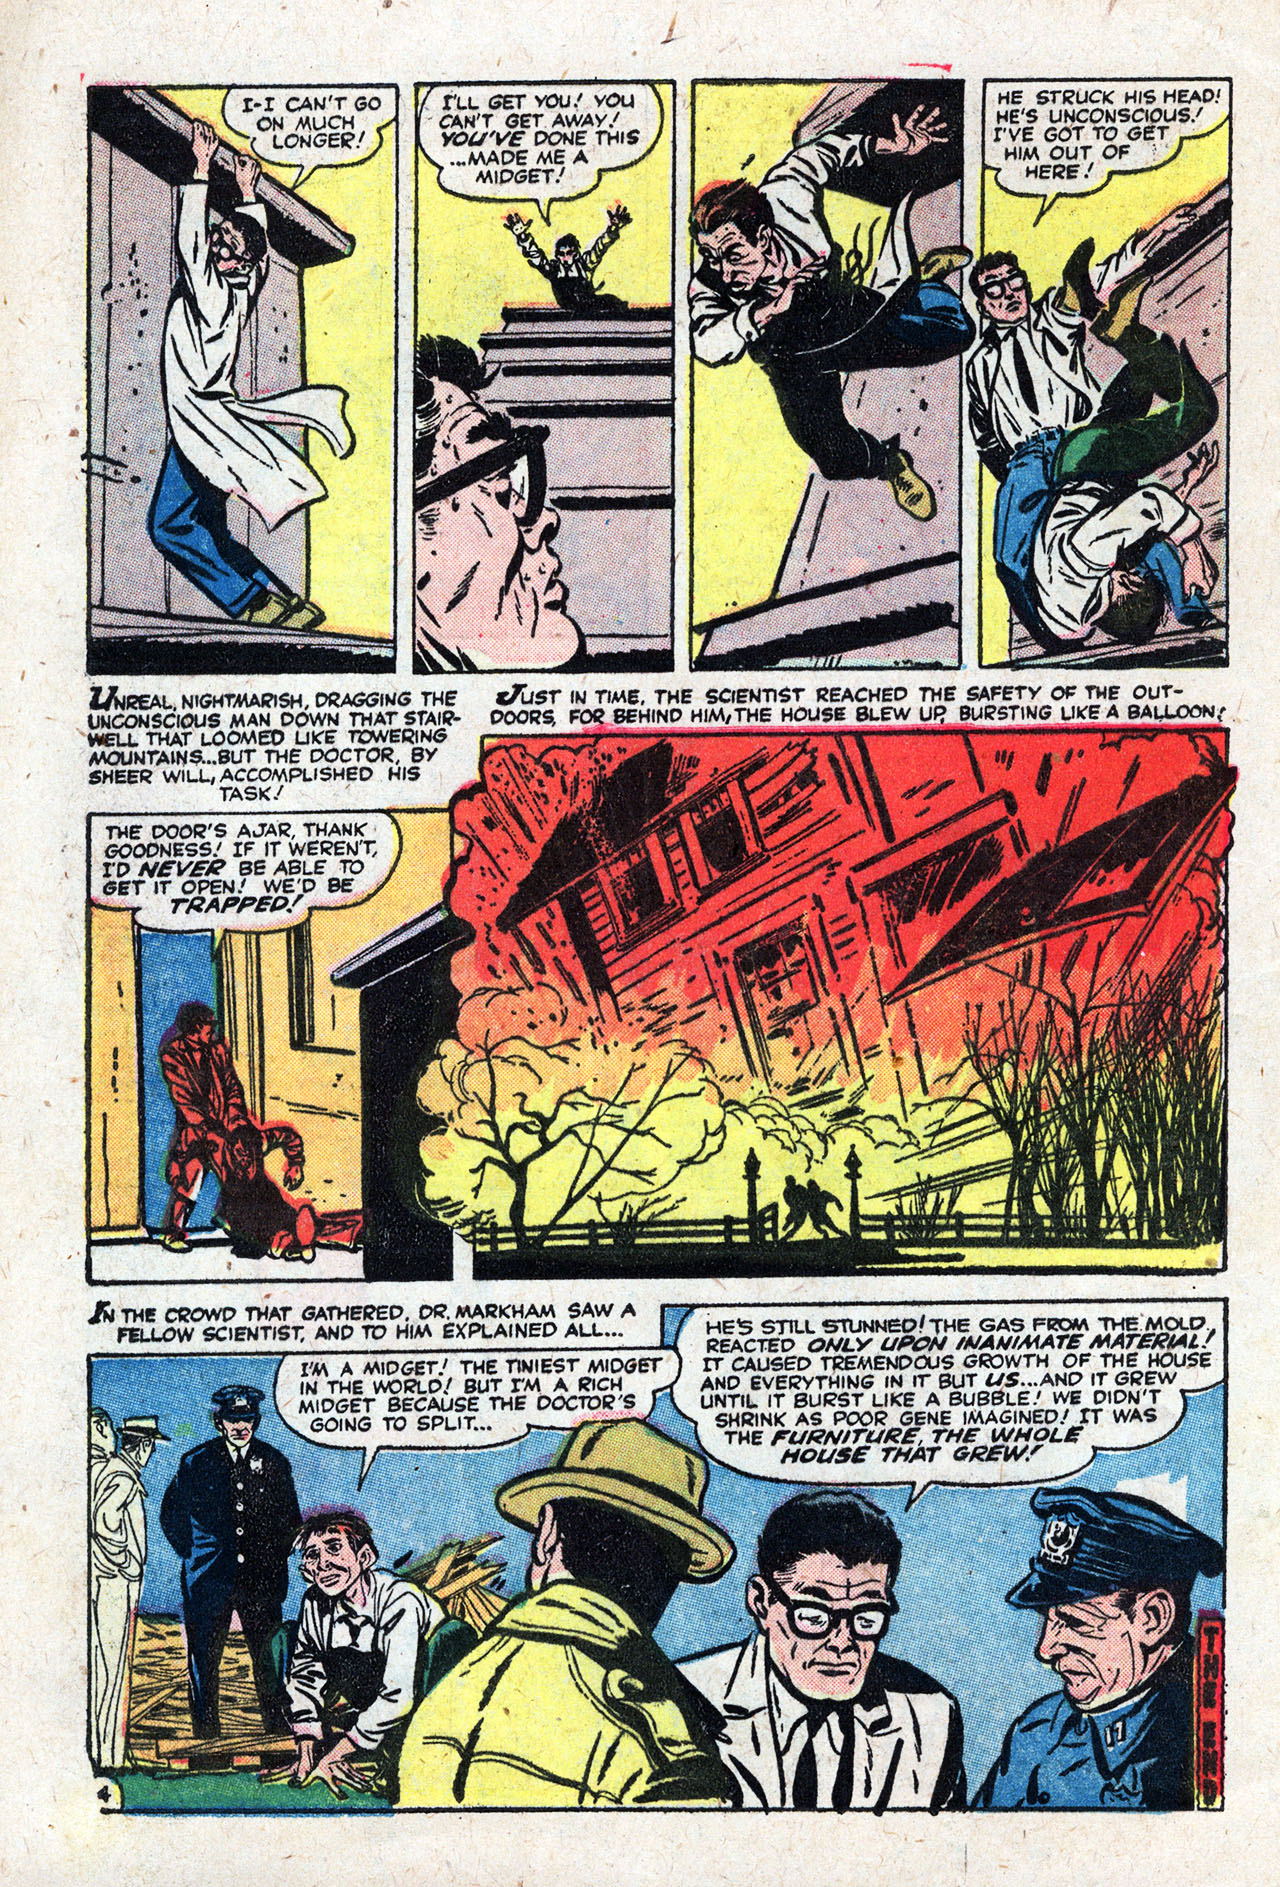 Marvel Tales (1949) 150 Page 15